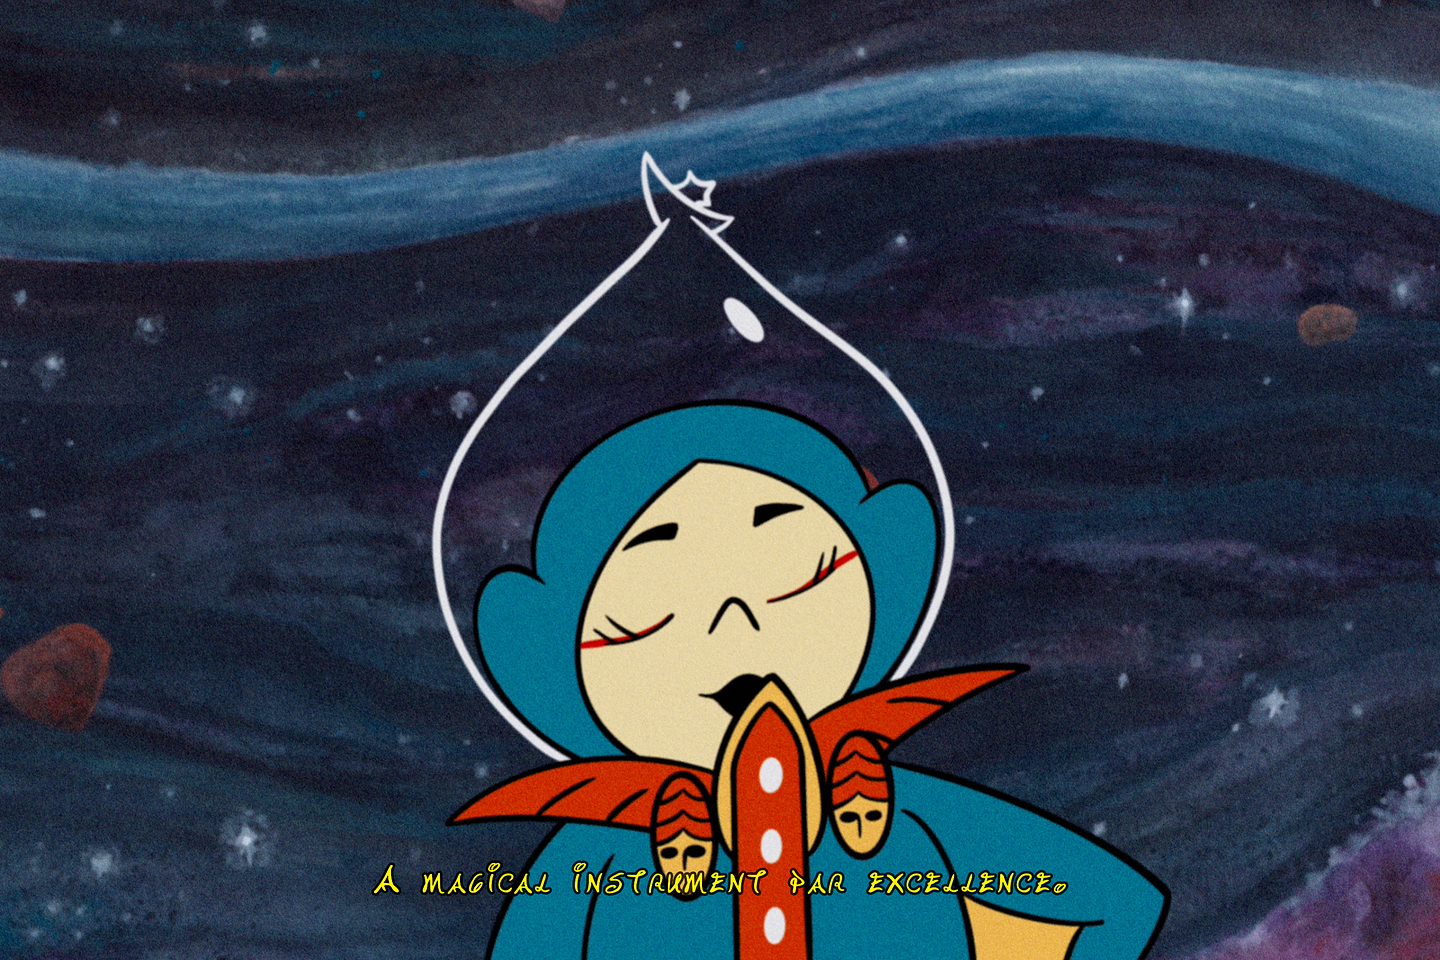 Drawn in a Hanna-Barbera-like style, a cartoon character wears a stylized blue space suit with a red chest piece. Their head is enclosed within a tear-drop shaped astronaut helmet. “A magical instrument par excellence” runs across the bottom of the image in swirly yellow capitalized text. A watercolour painting of a galaxy composes the background. 
